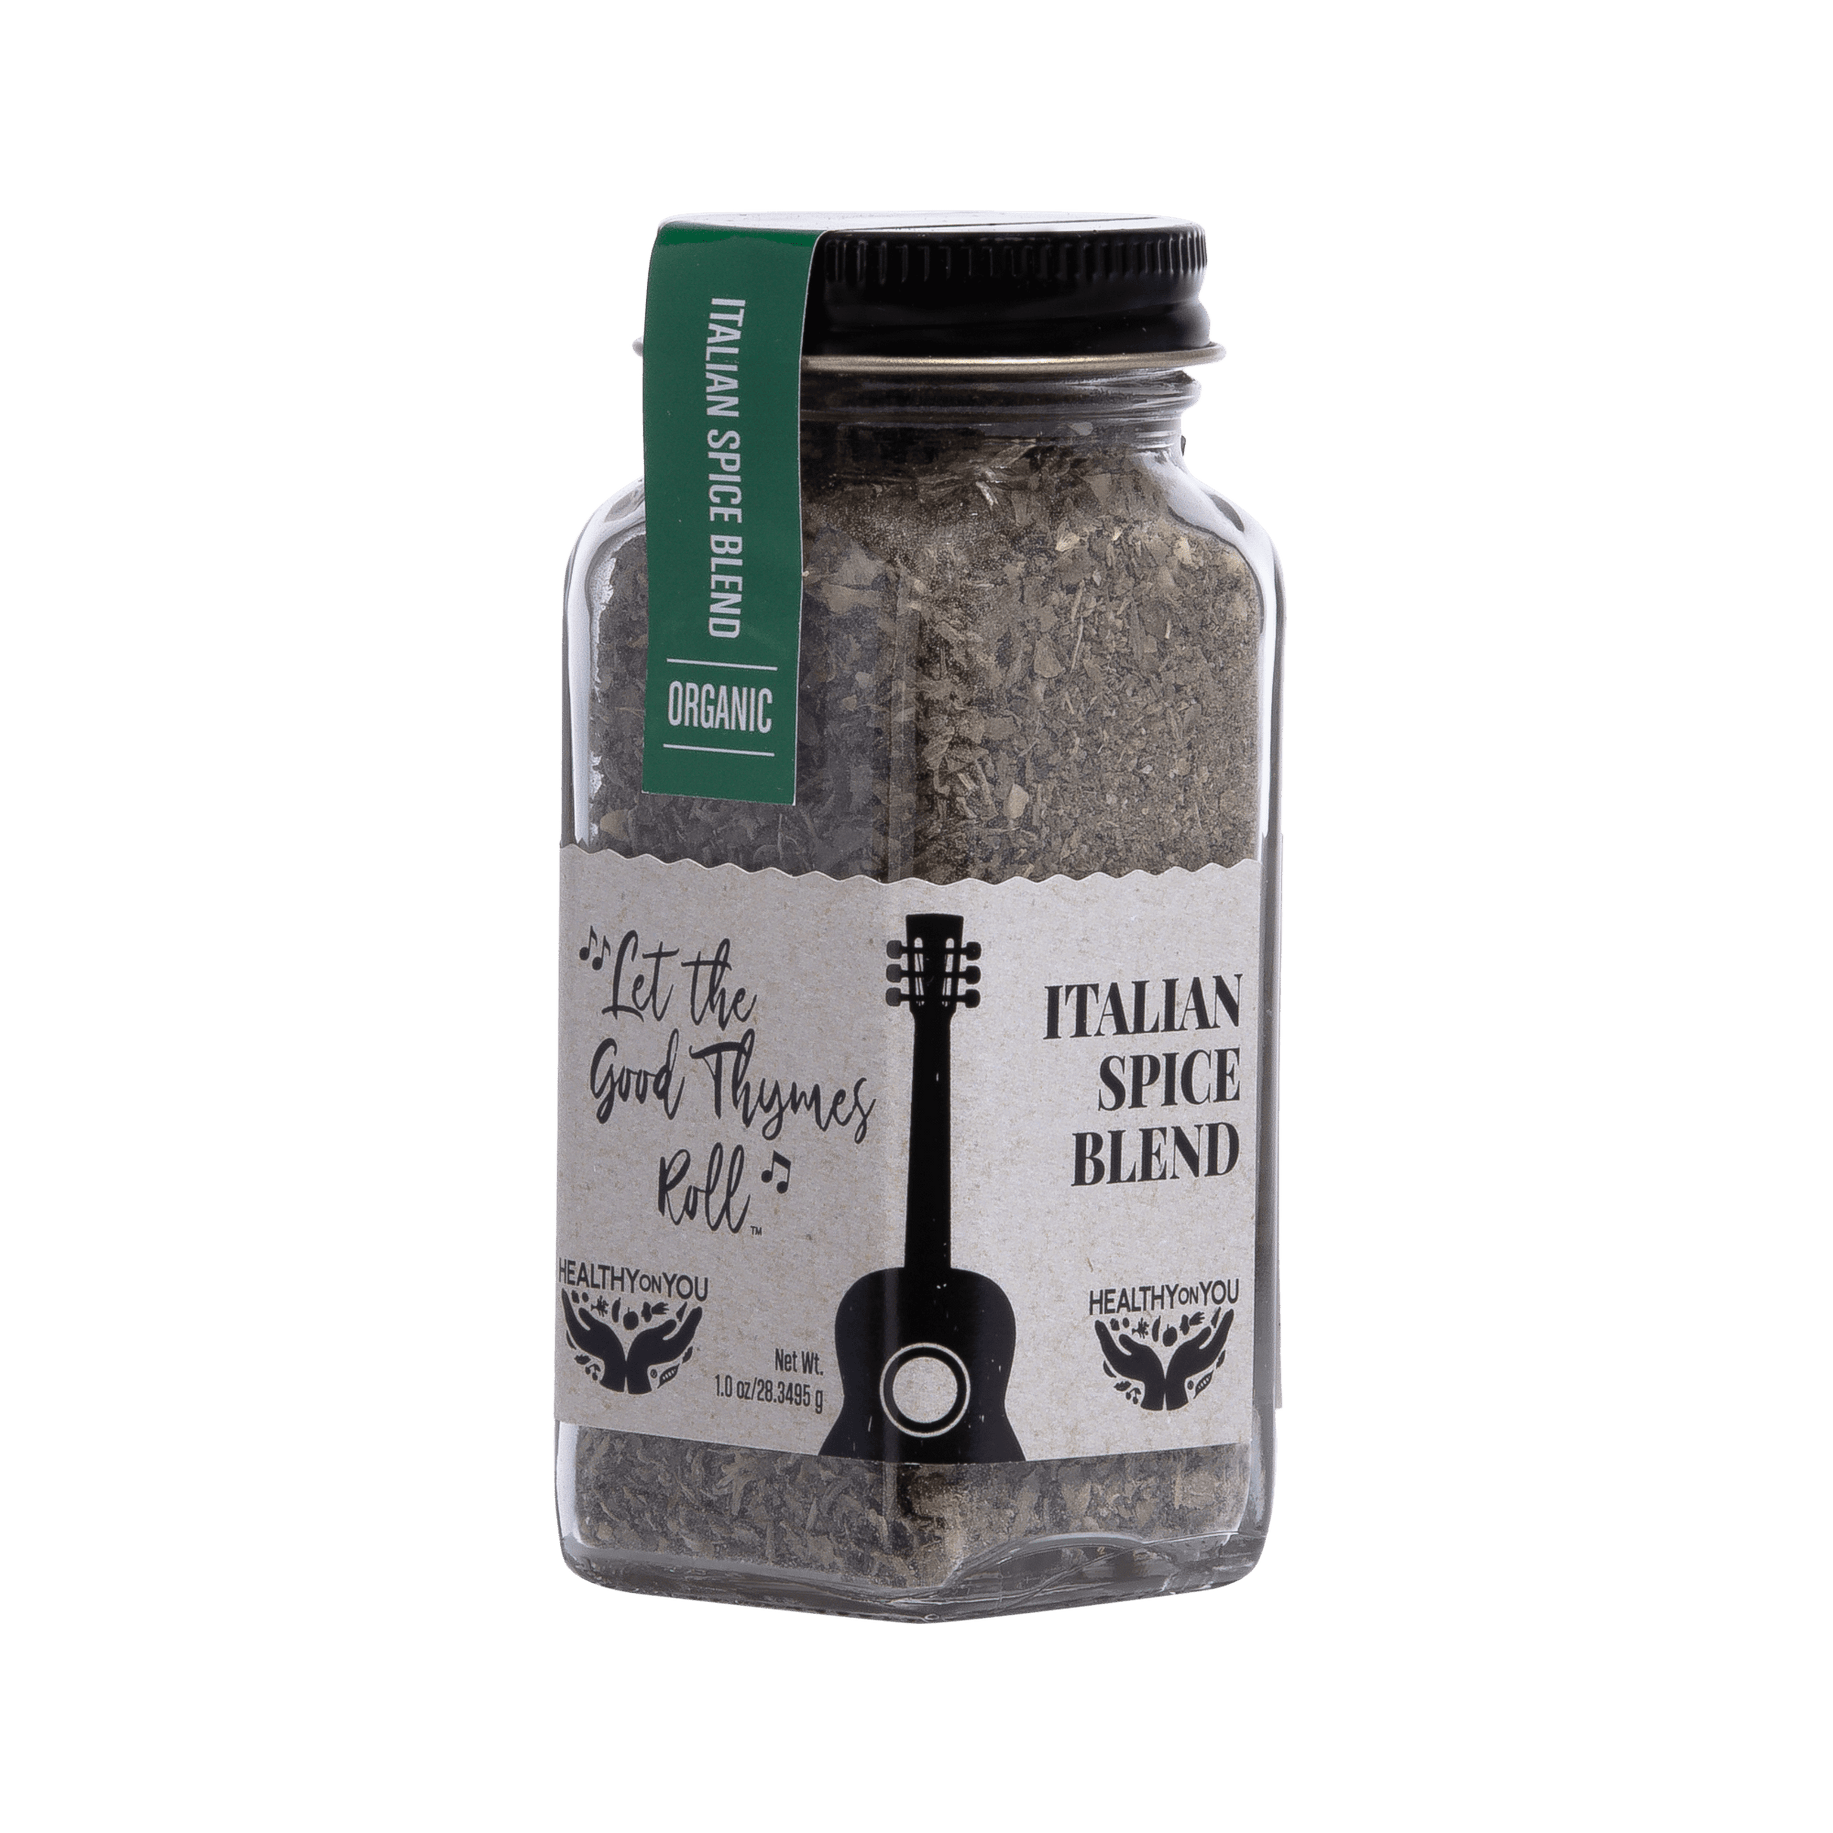 Healthy on You Let The Good Thymes Roll, Italian Spice Blend - 1.63 oz